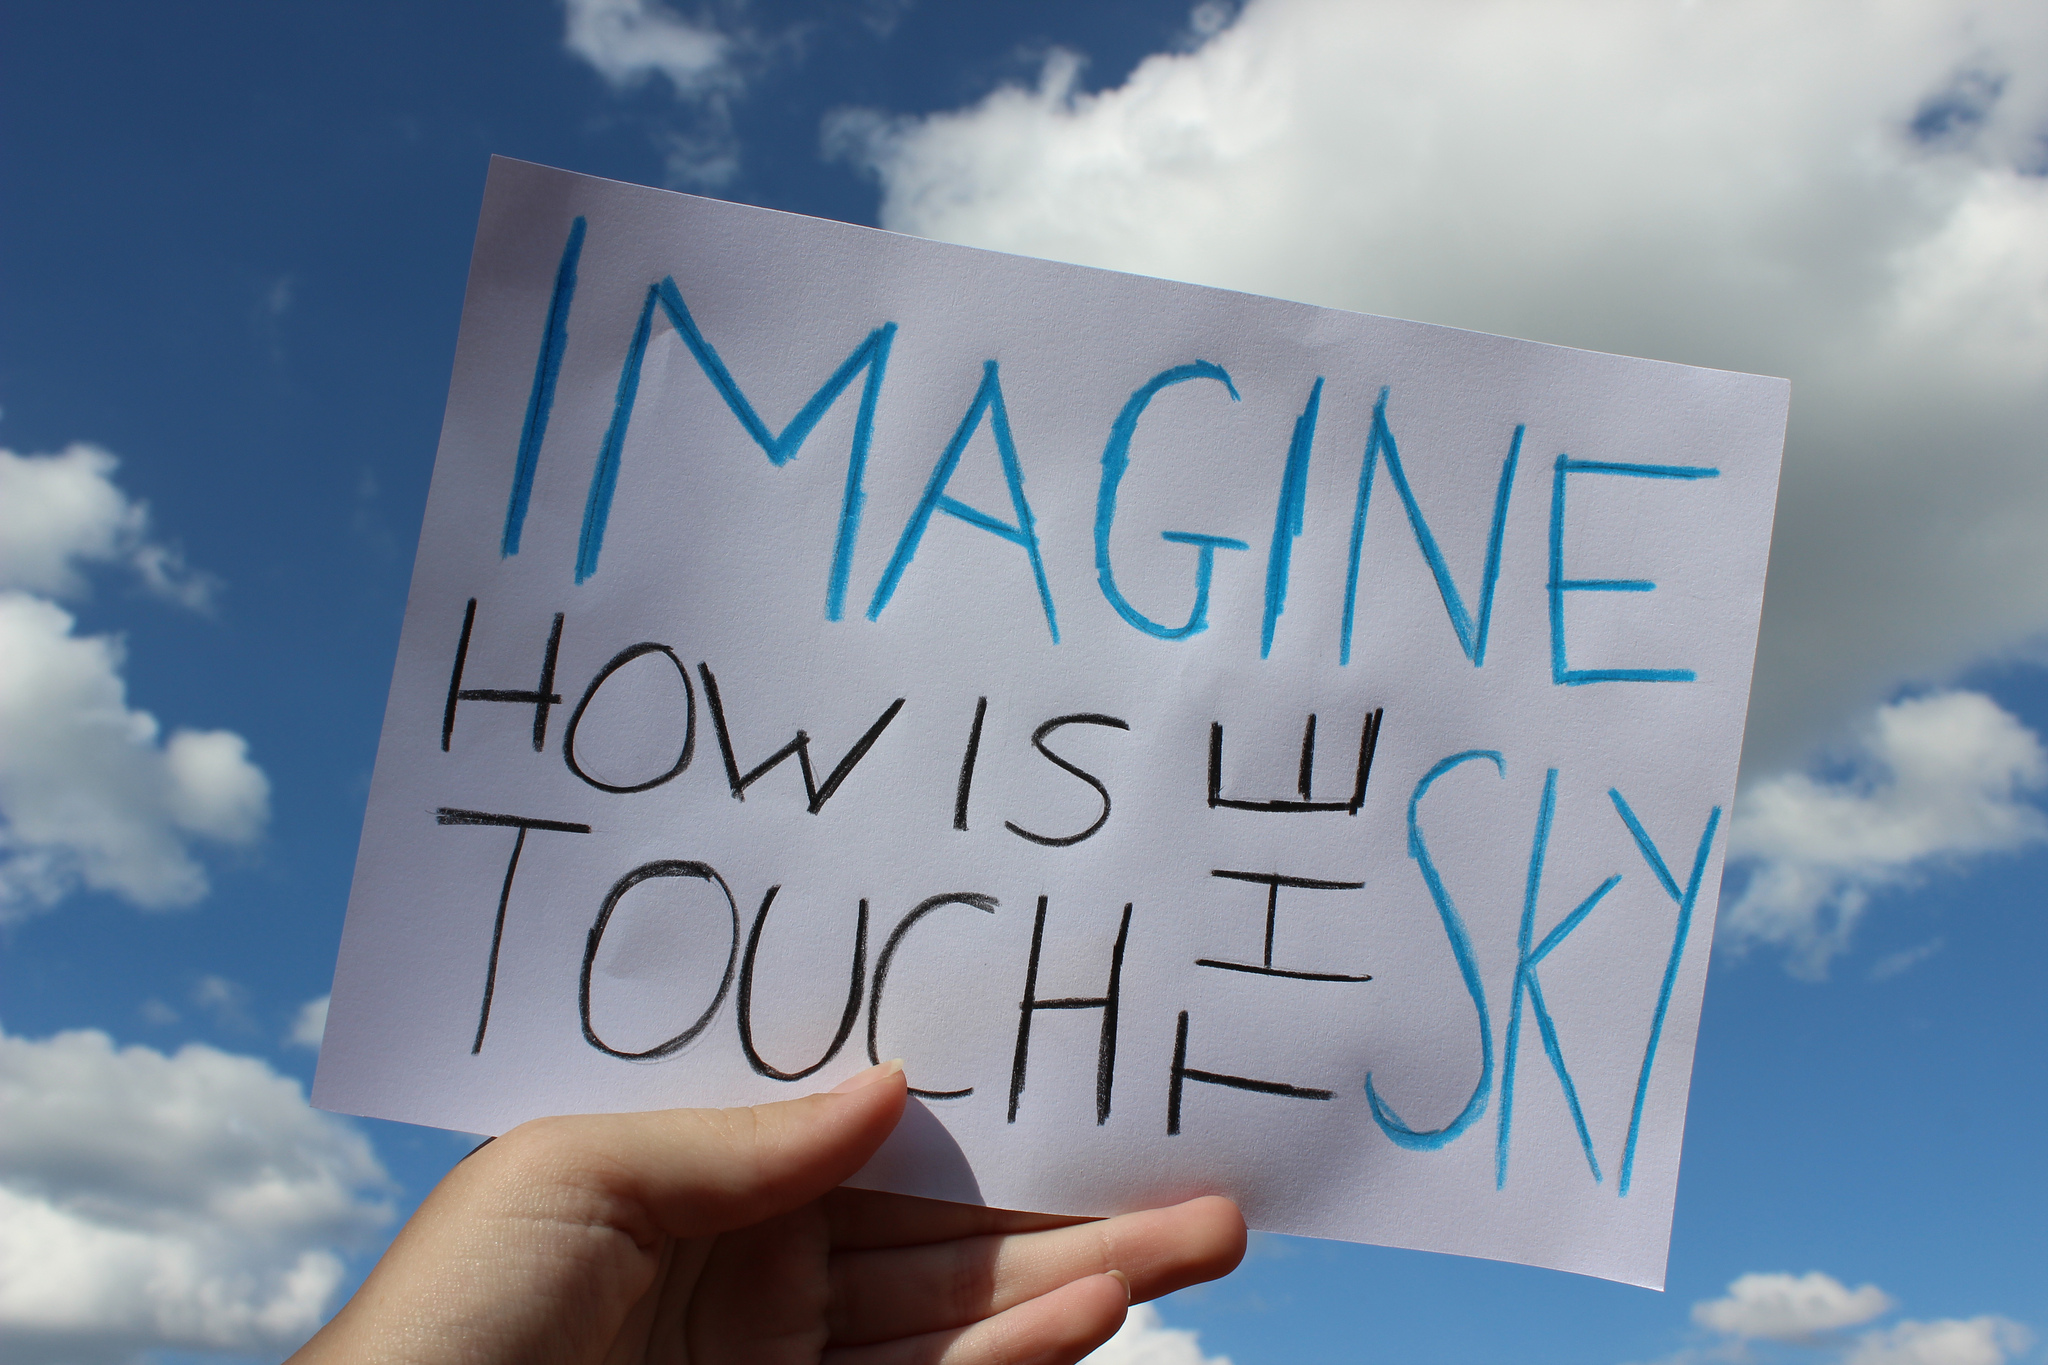 imagine-how-is-touch-the-sky